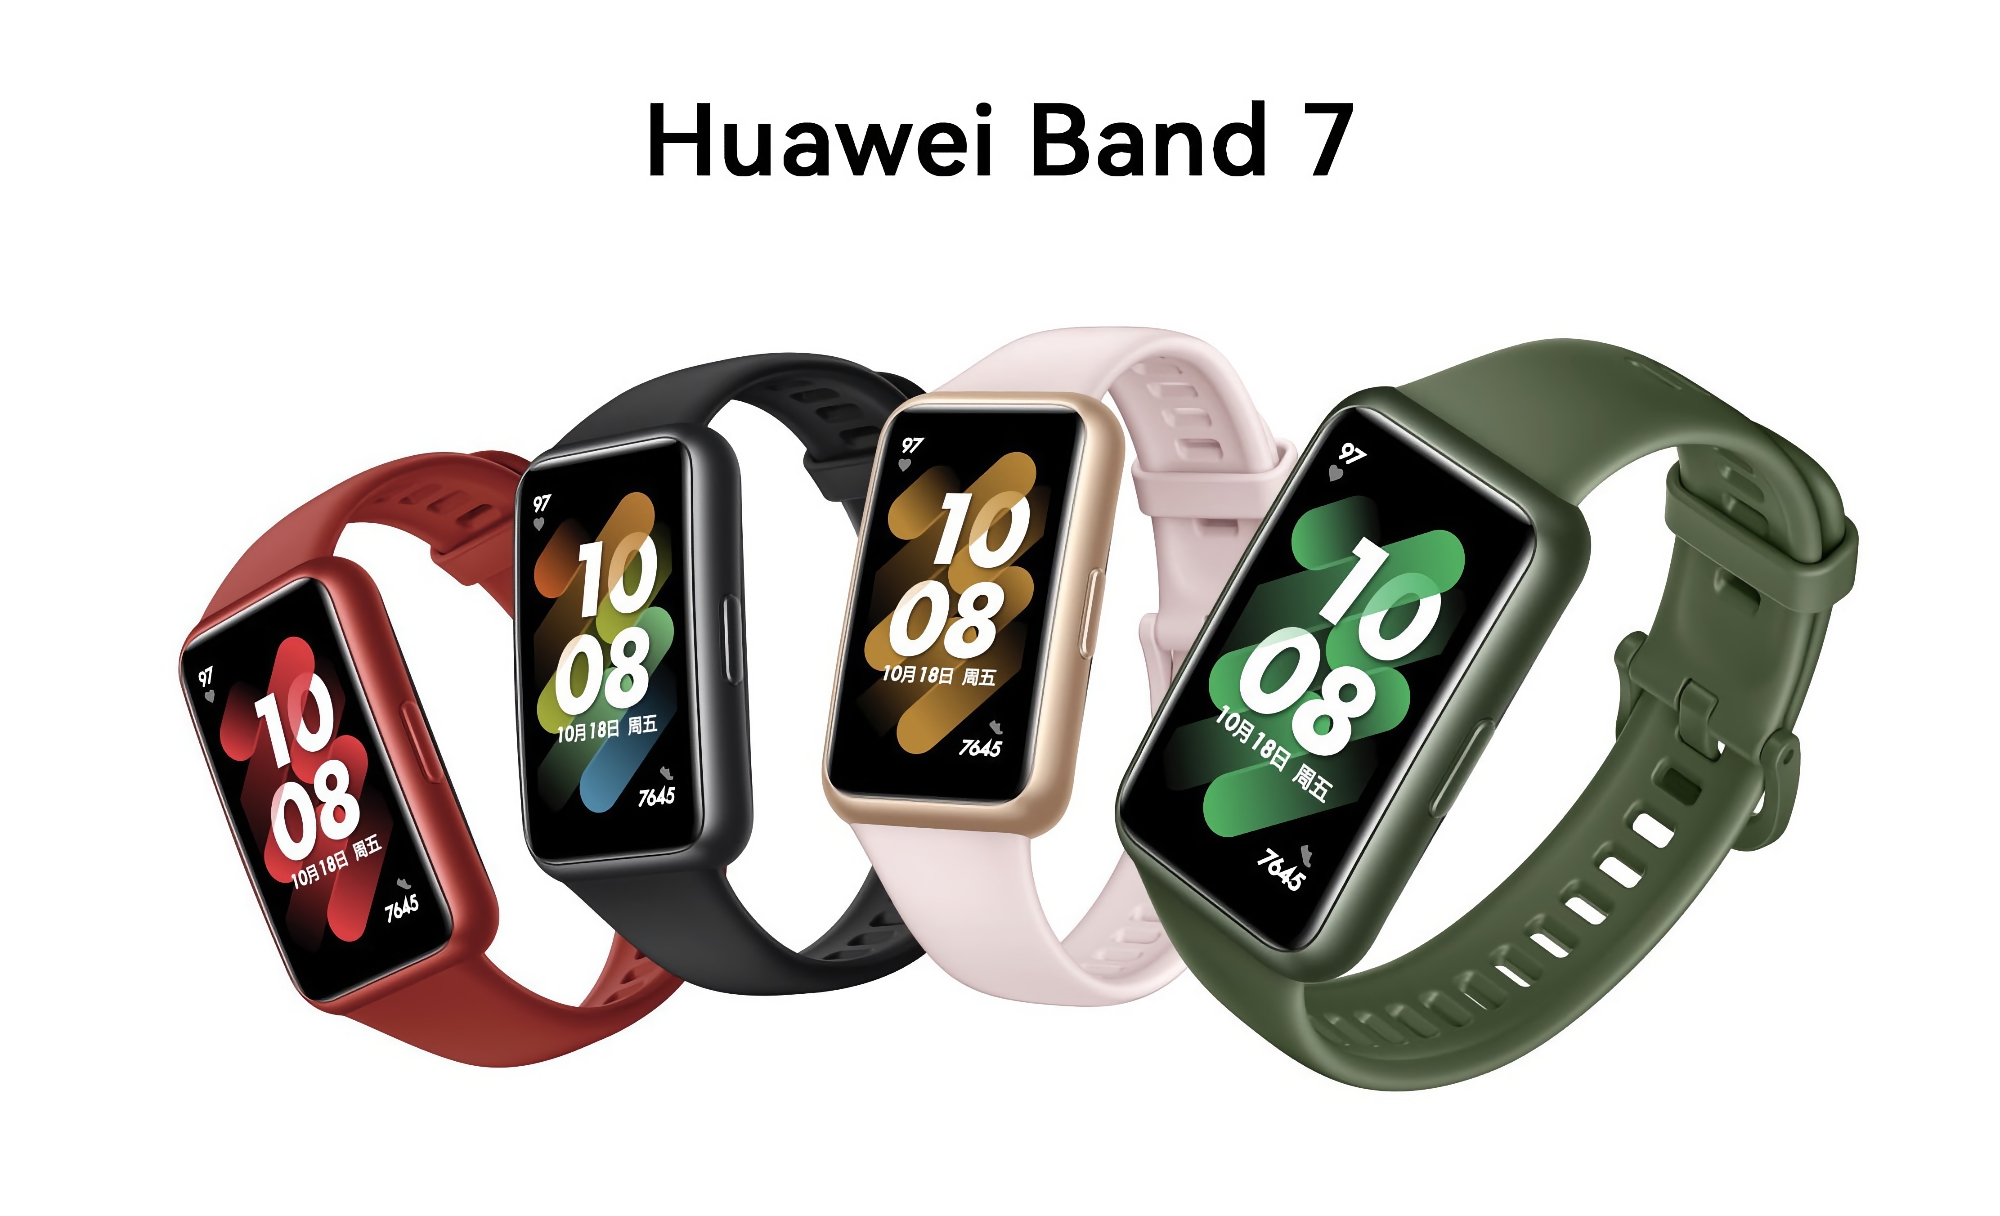 Huawei Band 7 with AMOLED screen, water protection and autonomy up to 14 days is already on sale on AliExpress